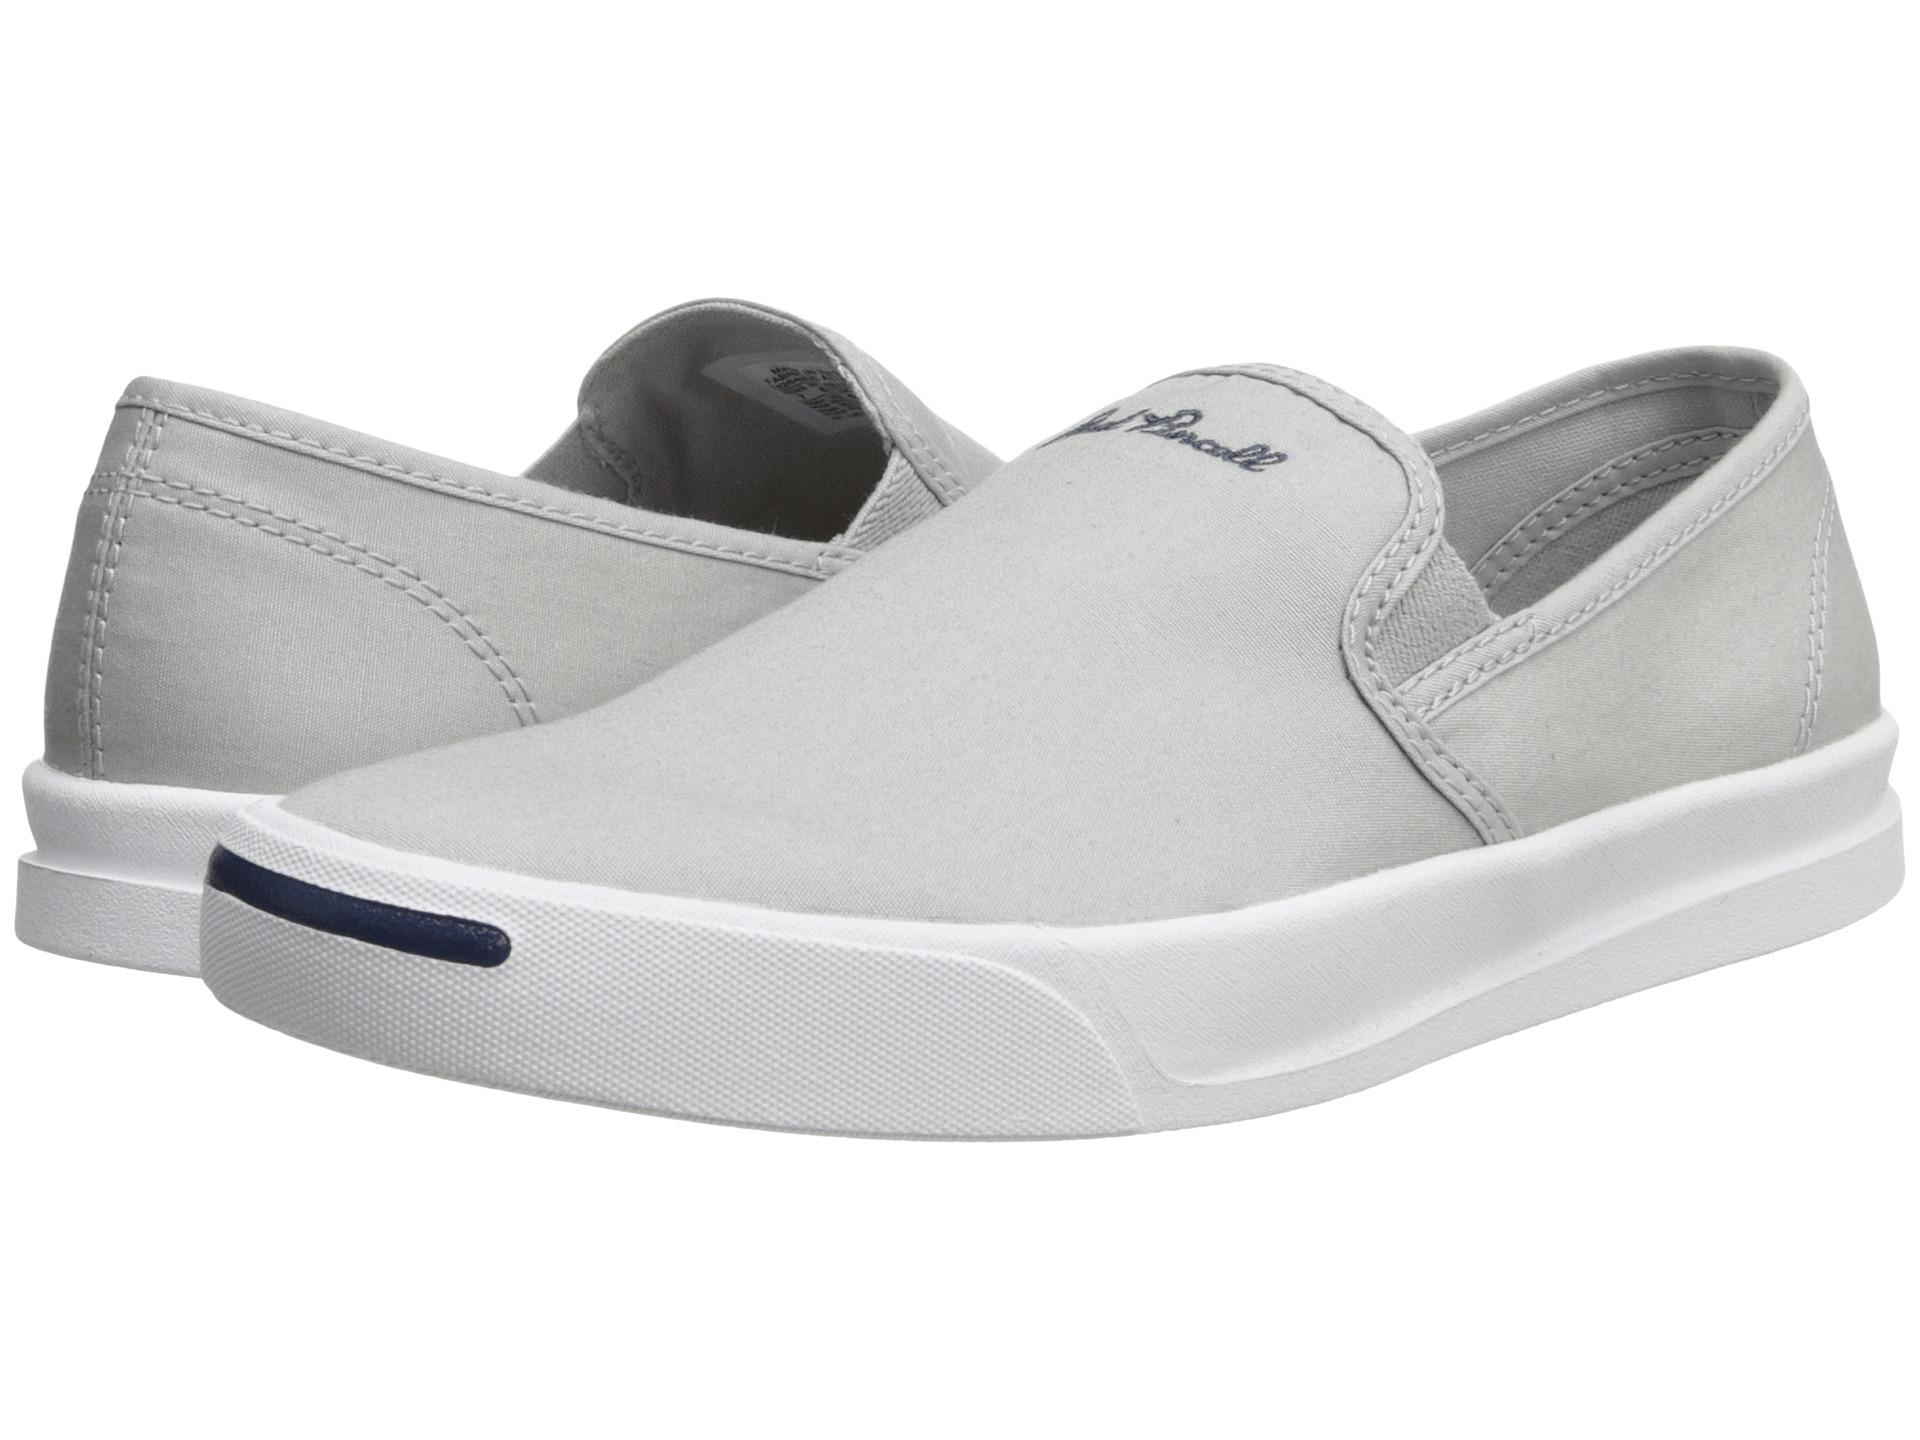 Converse Jack Purcell Jeffrey Slip Oyster Gray White | Shipped Free at ...